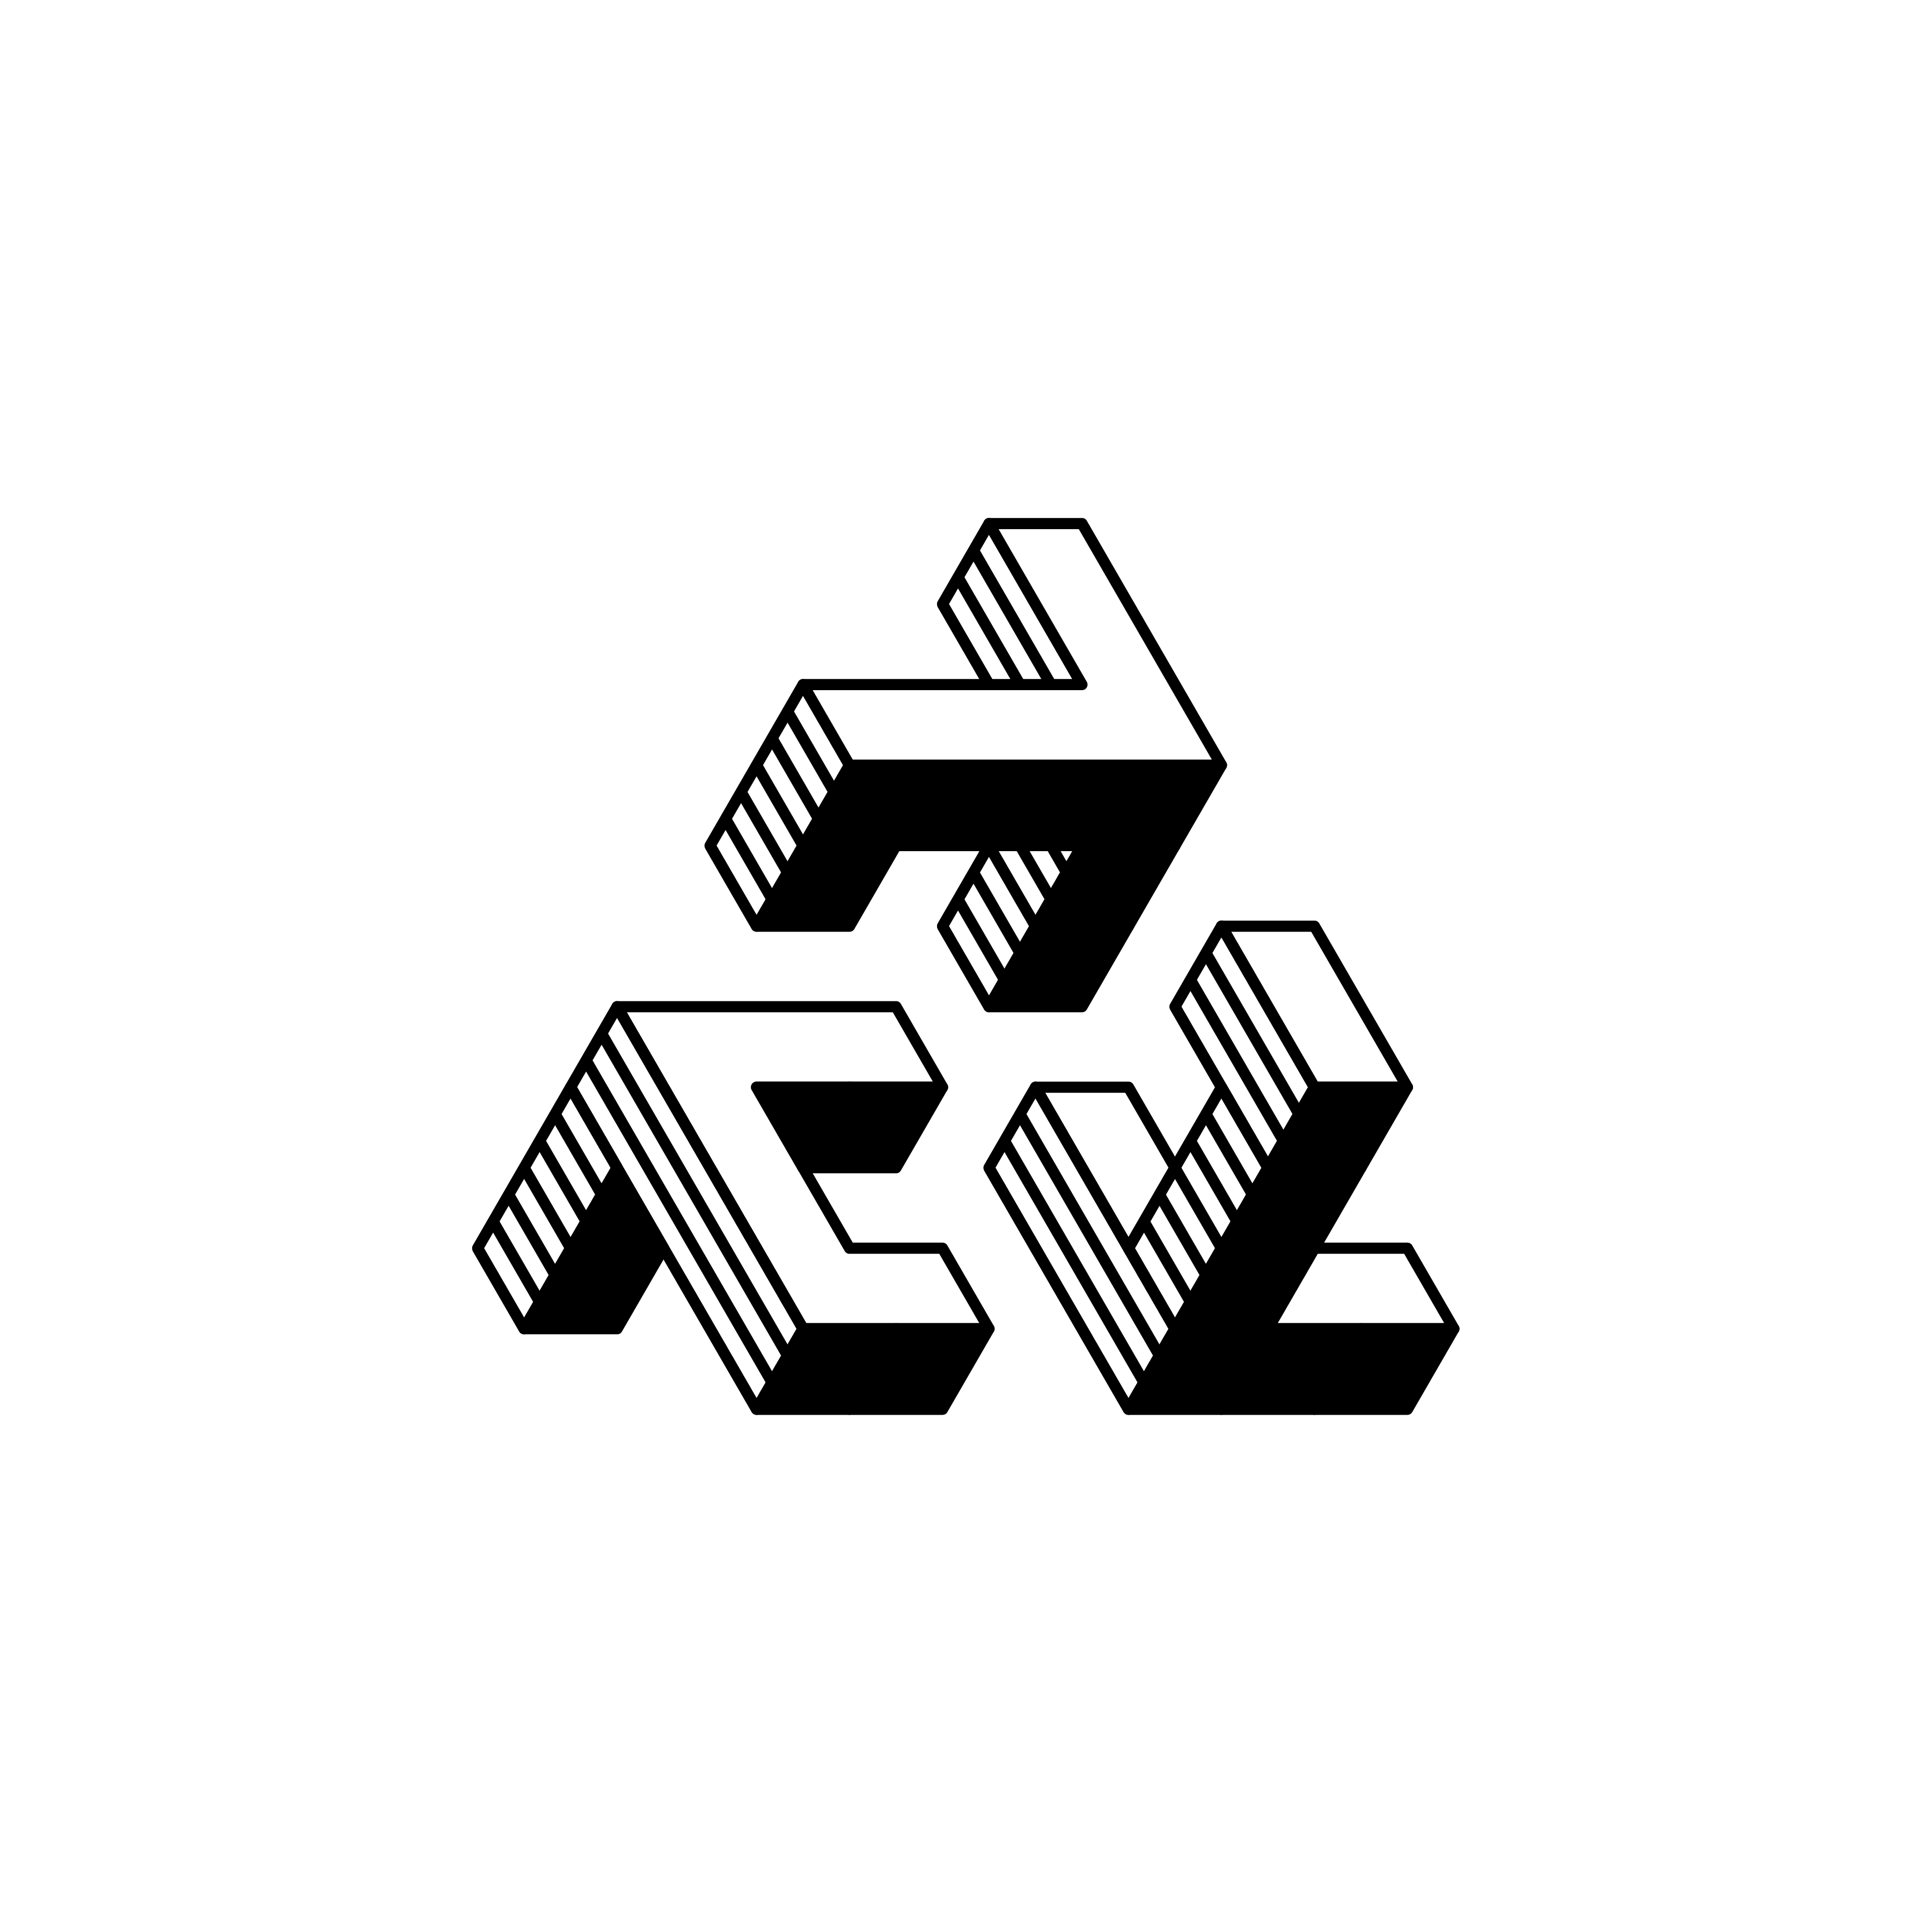 19-TDC-Recycle-Logo-Redesign-004b-03